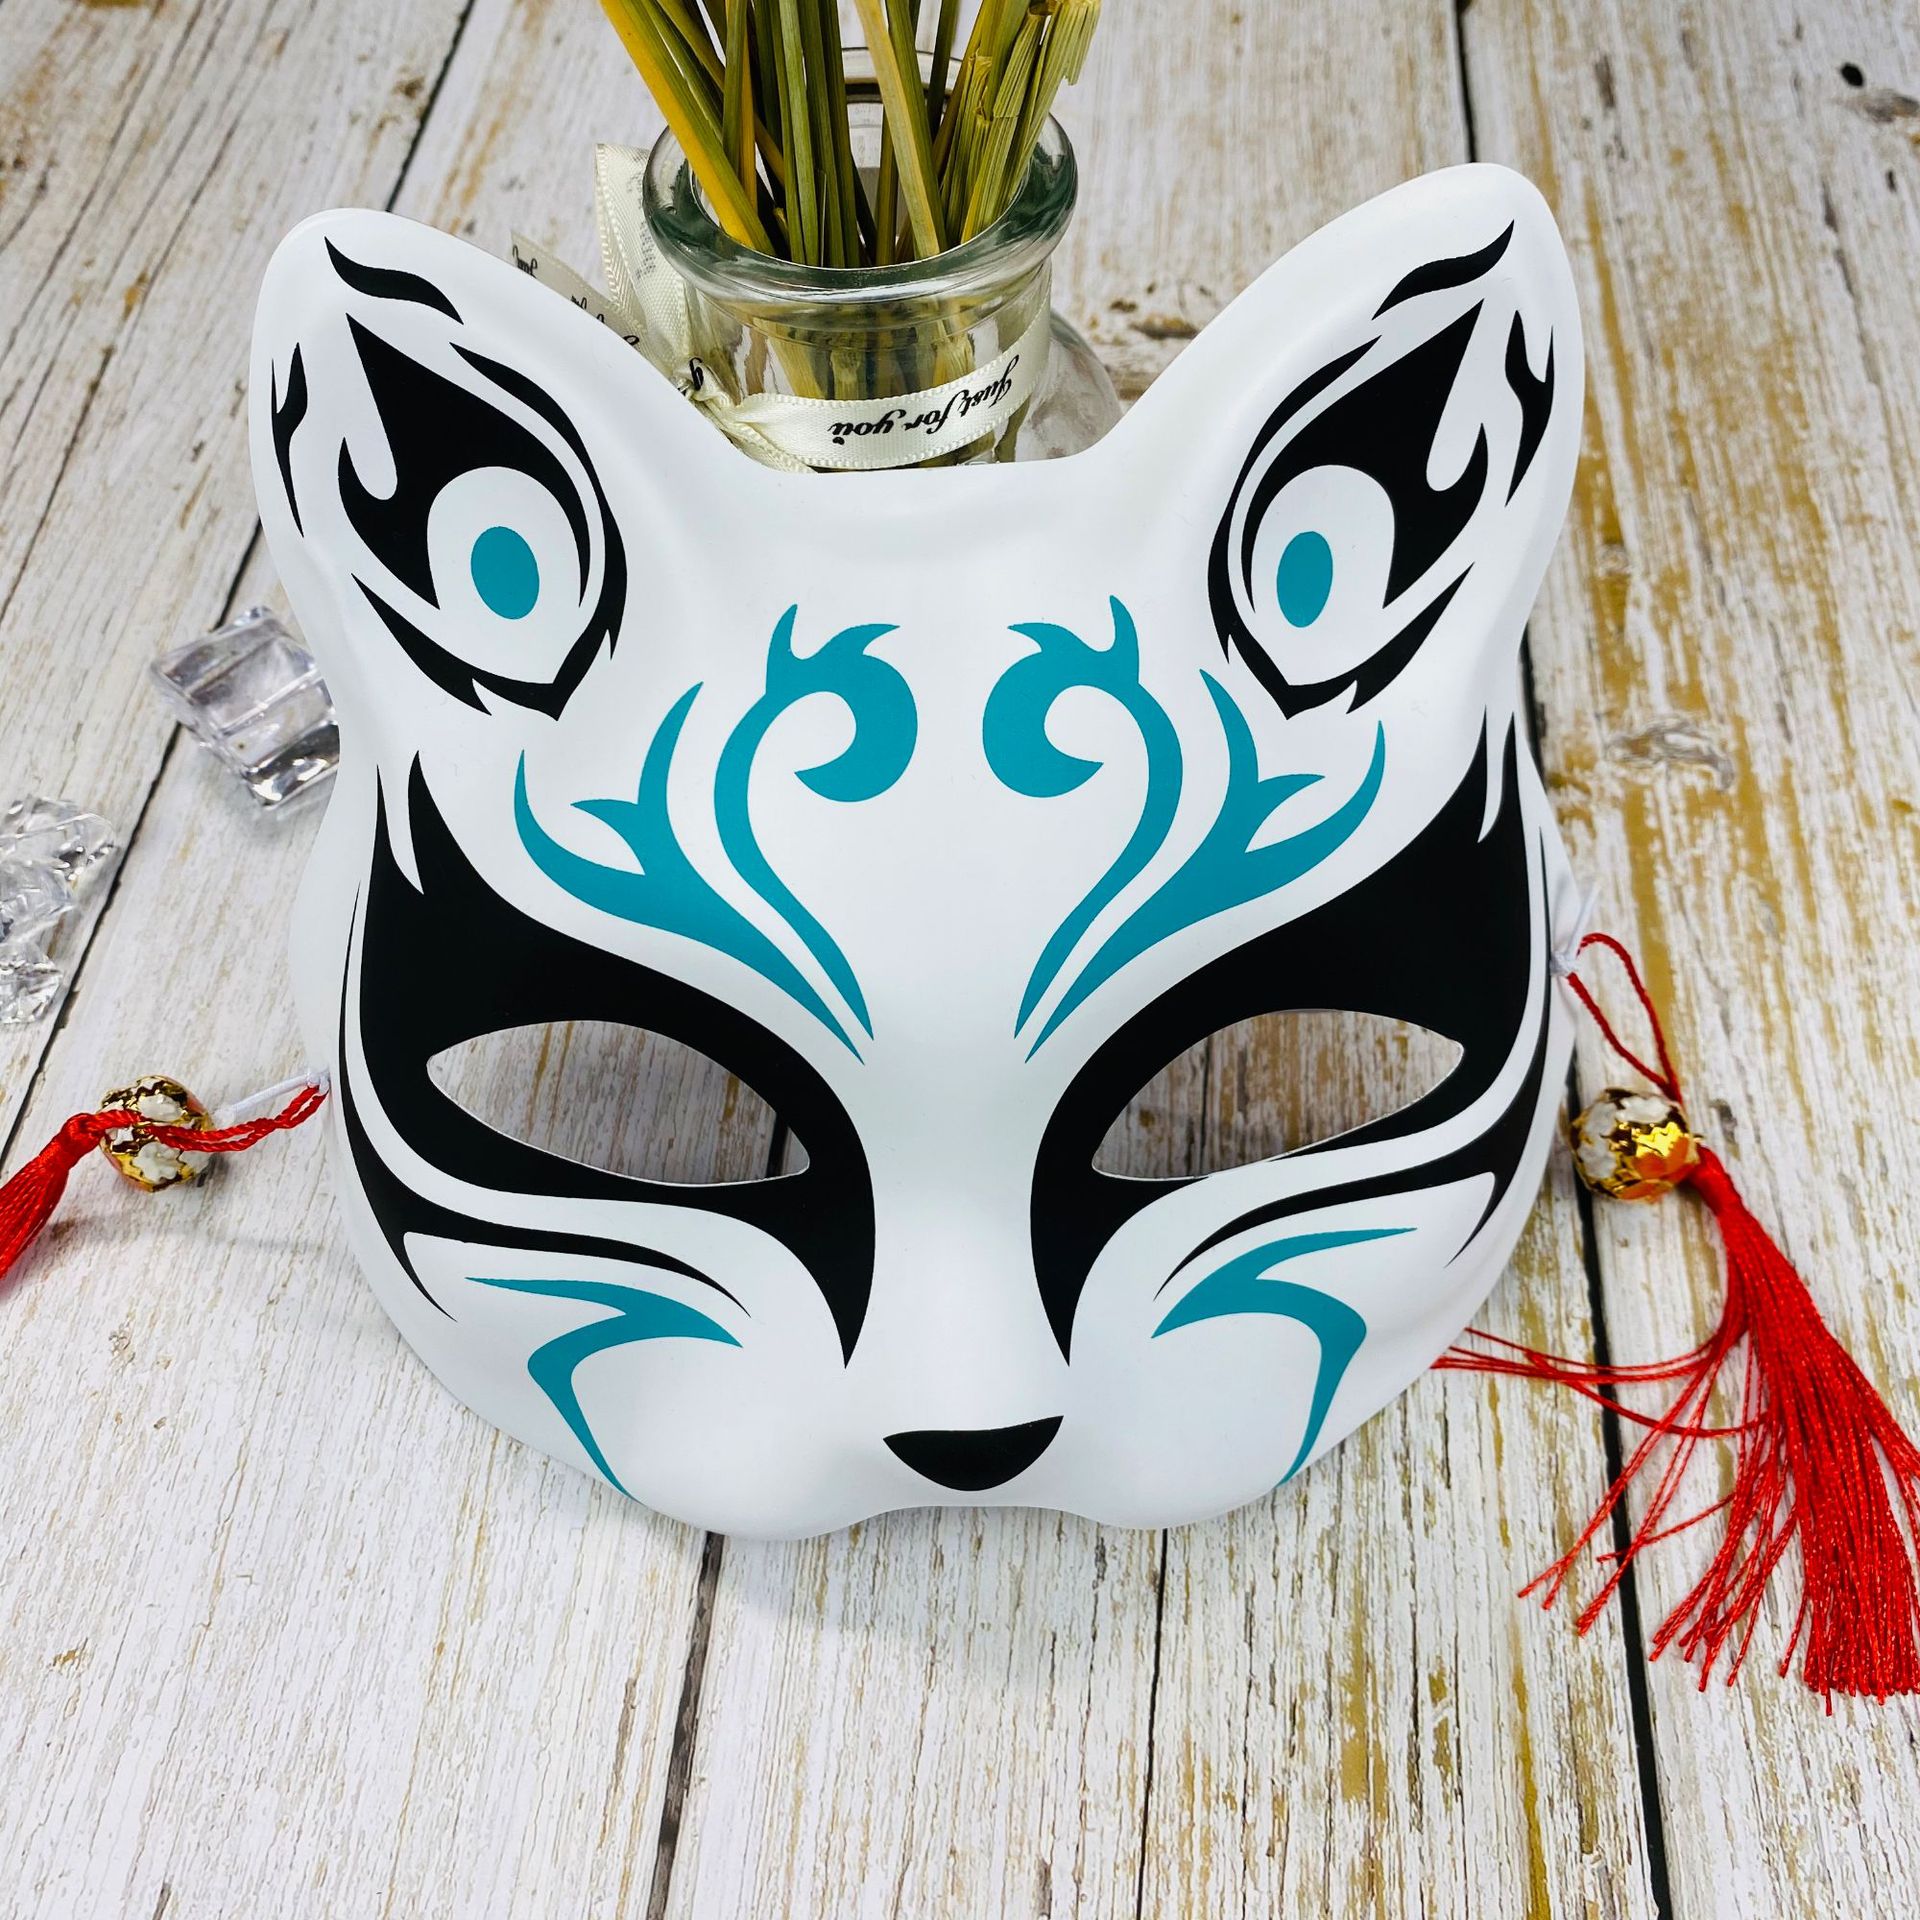 1pc, Cosplay Furry Fox Masks Party Props Masquerade Ball Masks Unisex Half Face Mask for Party, Stage Performance Props, Events Cosplay Props